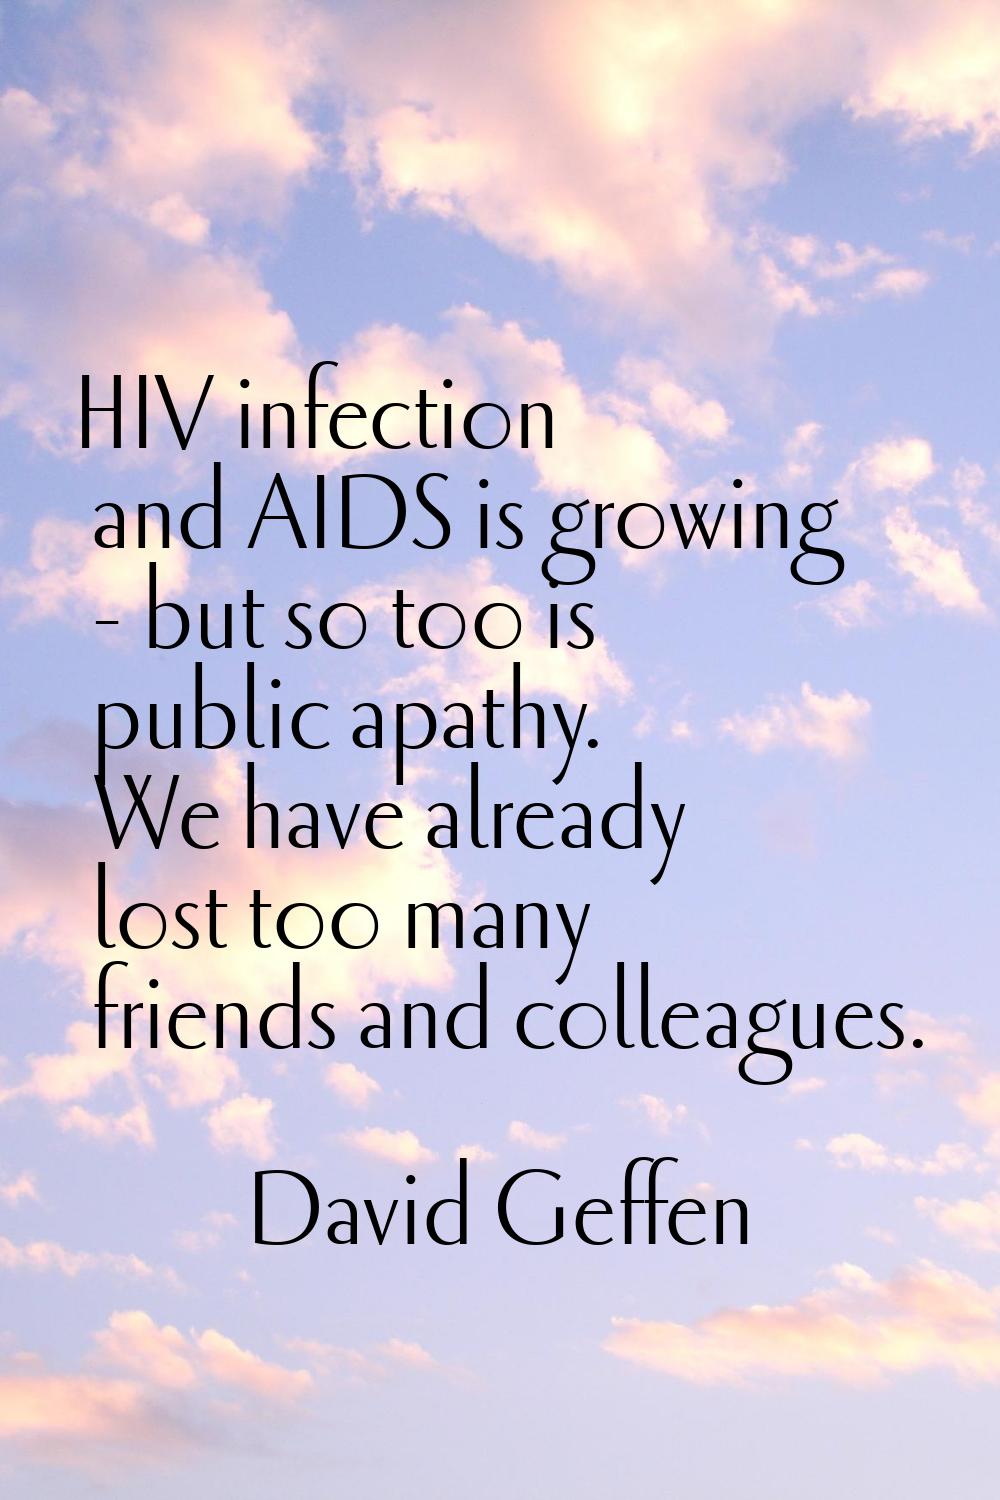 HIV infection and AIDS is growing - but so too is public apathy. We have already lost too many frie